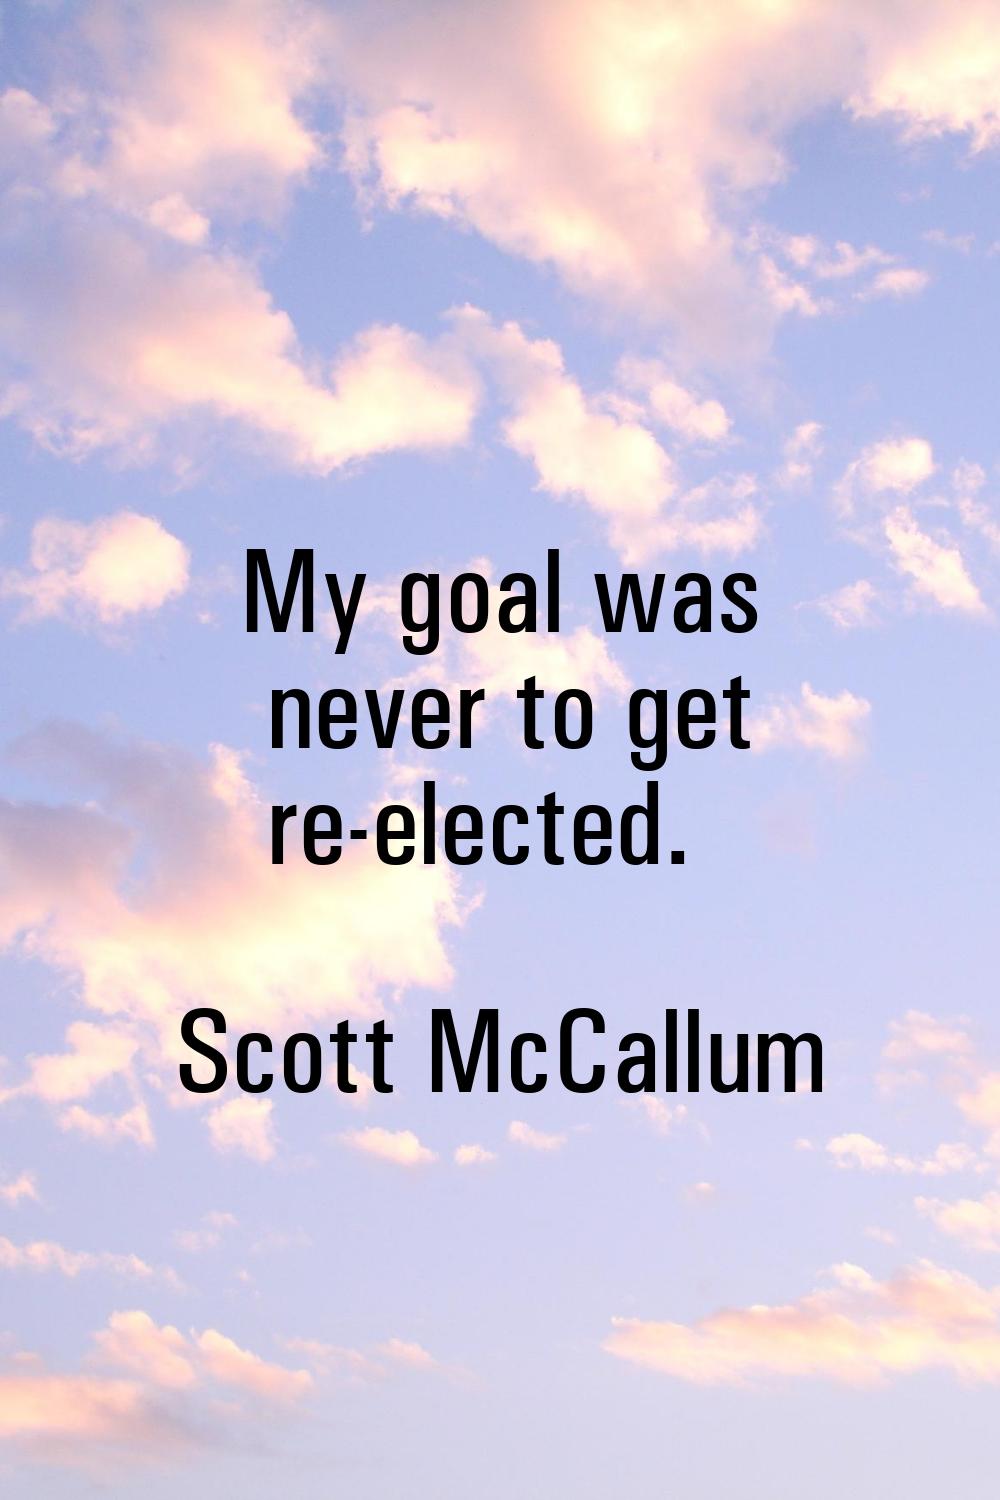 My goal was never to get re-elected.